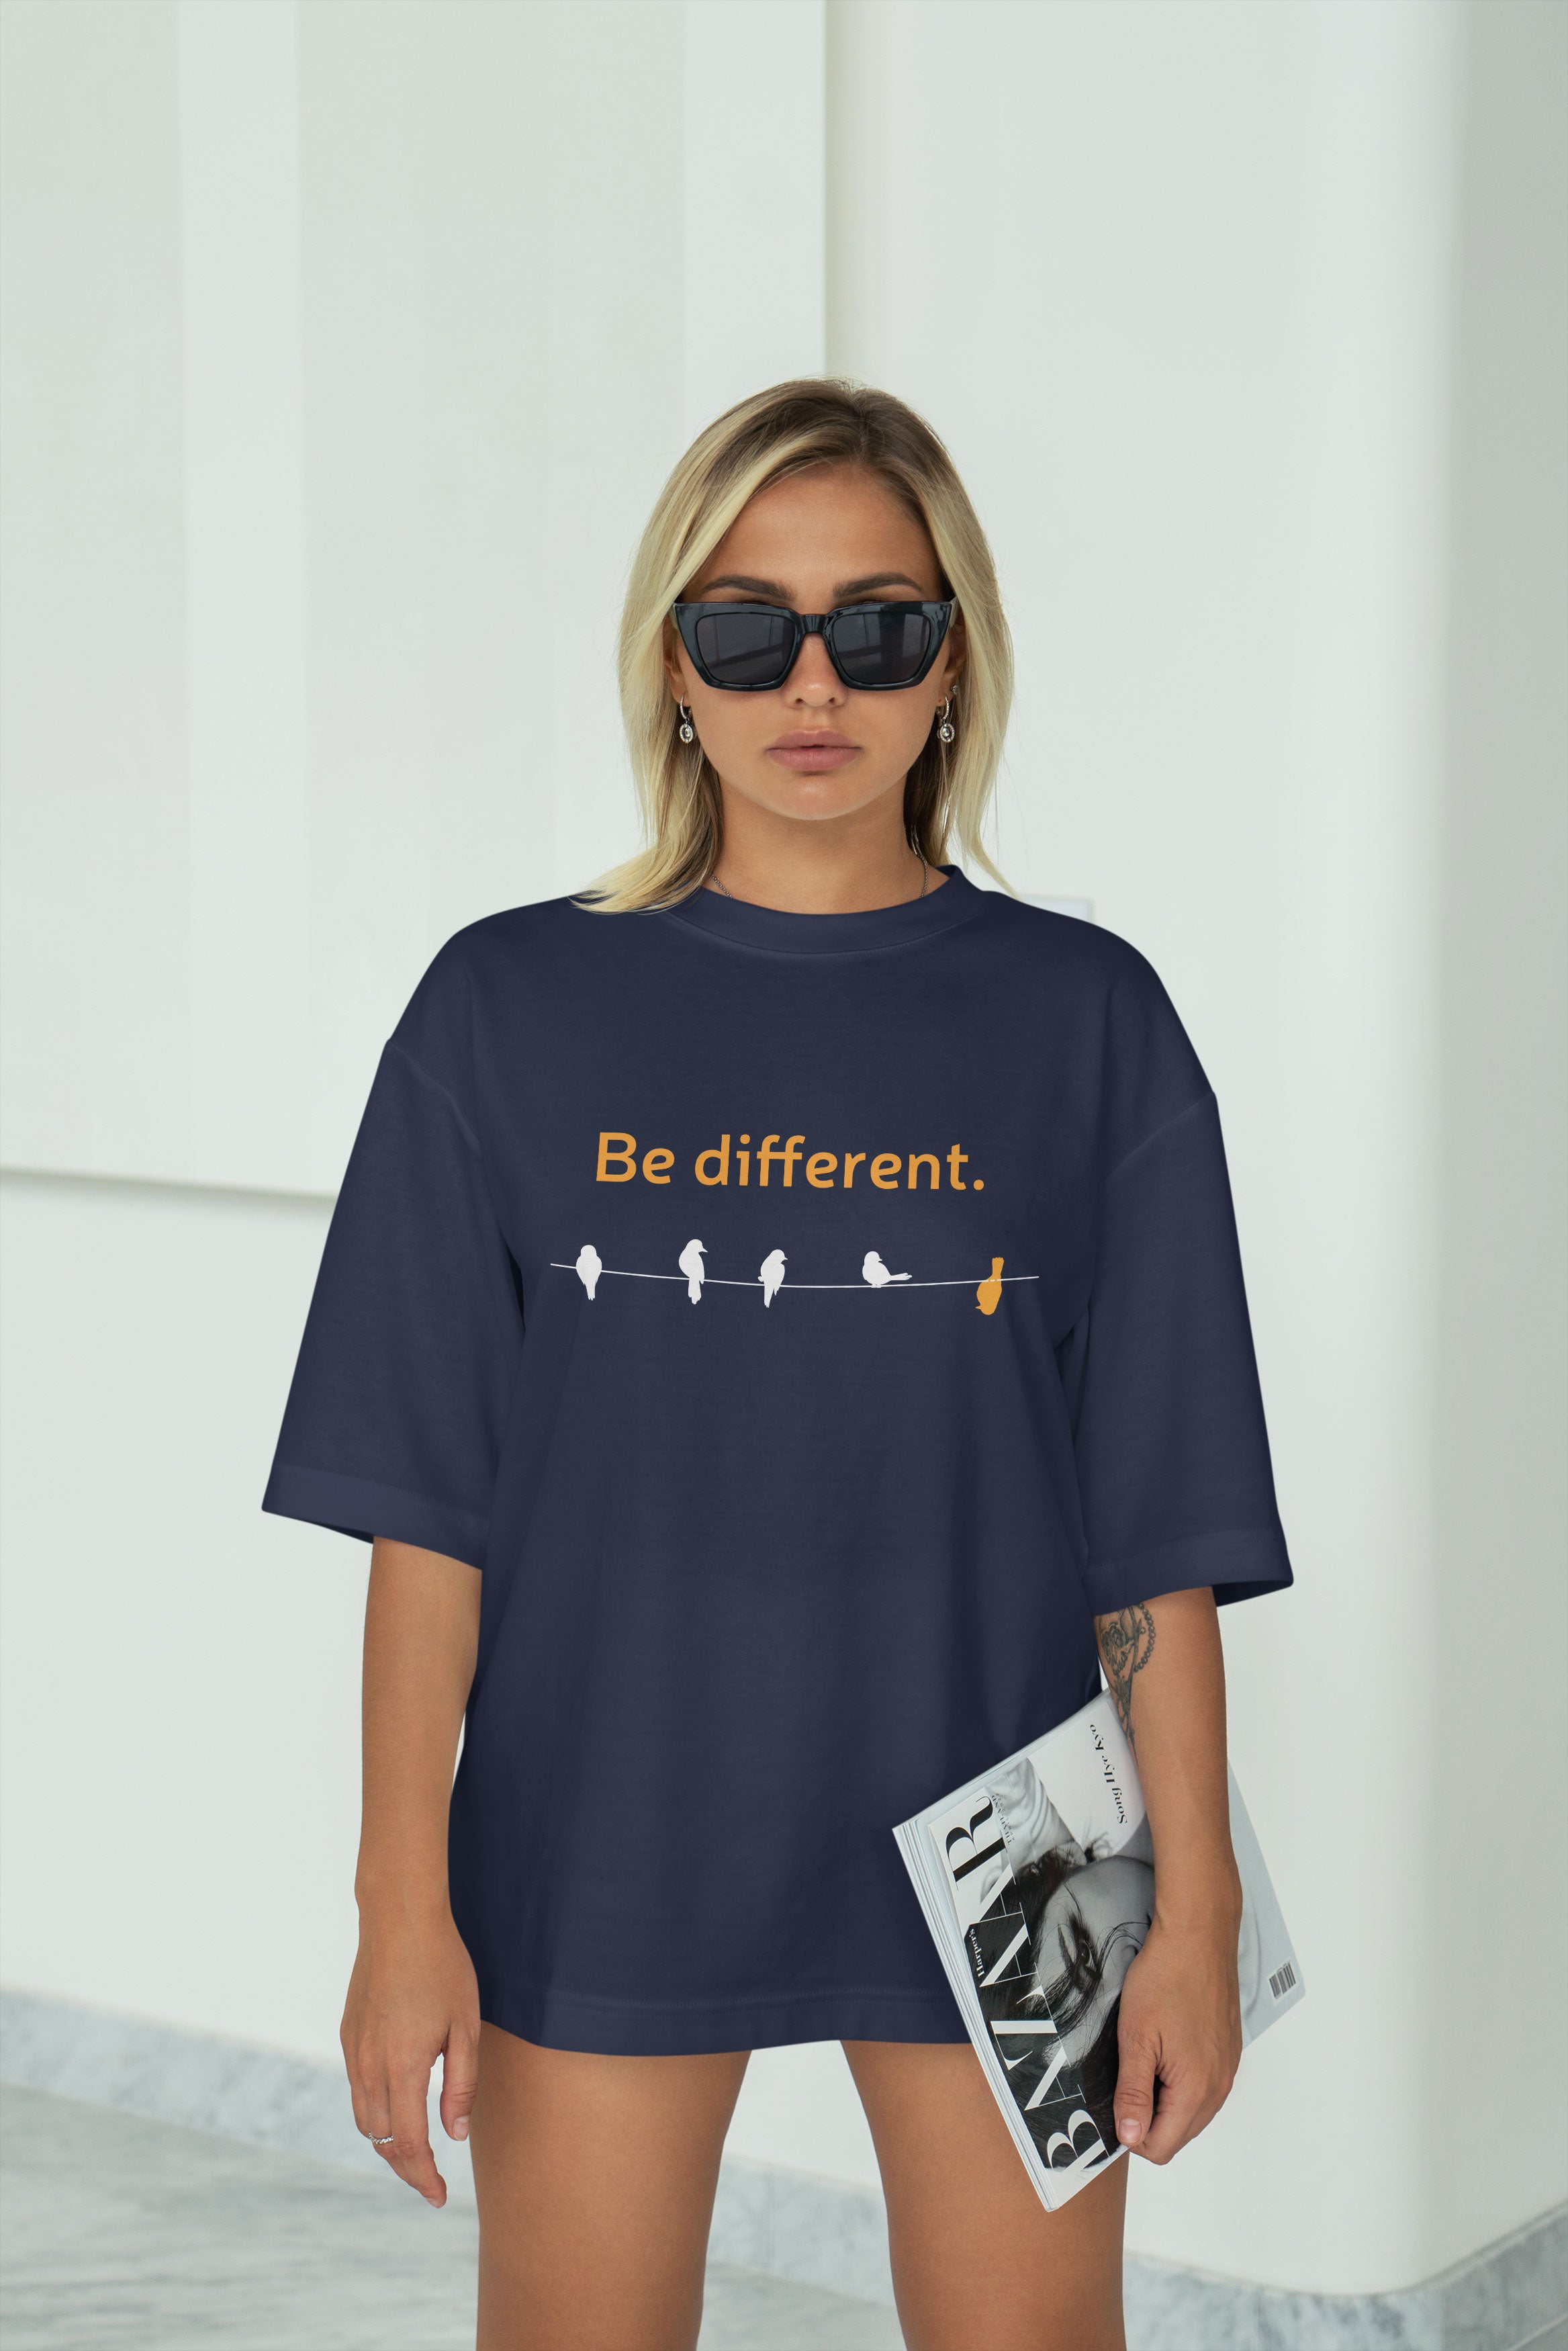 Brewing Hot Oversized Tshirt Unisex Be Different Tshirts